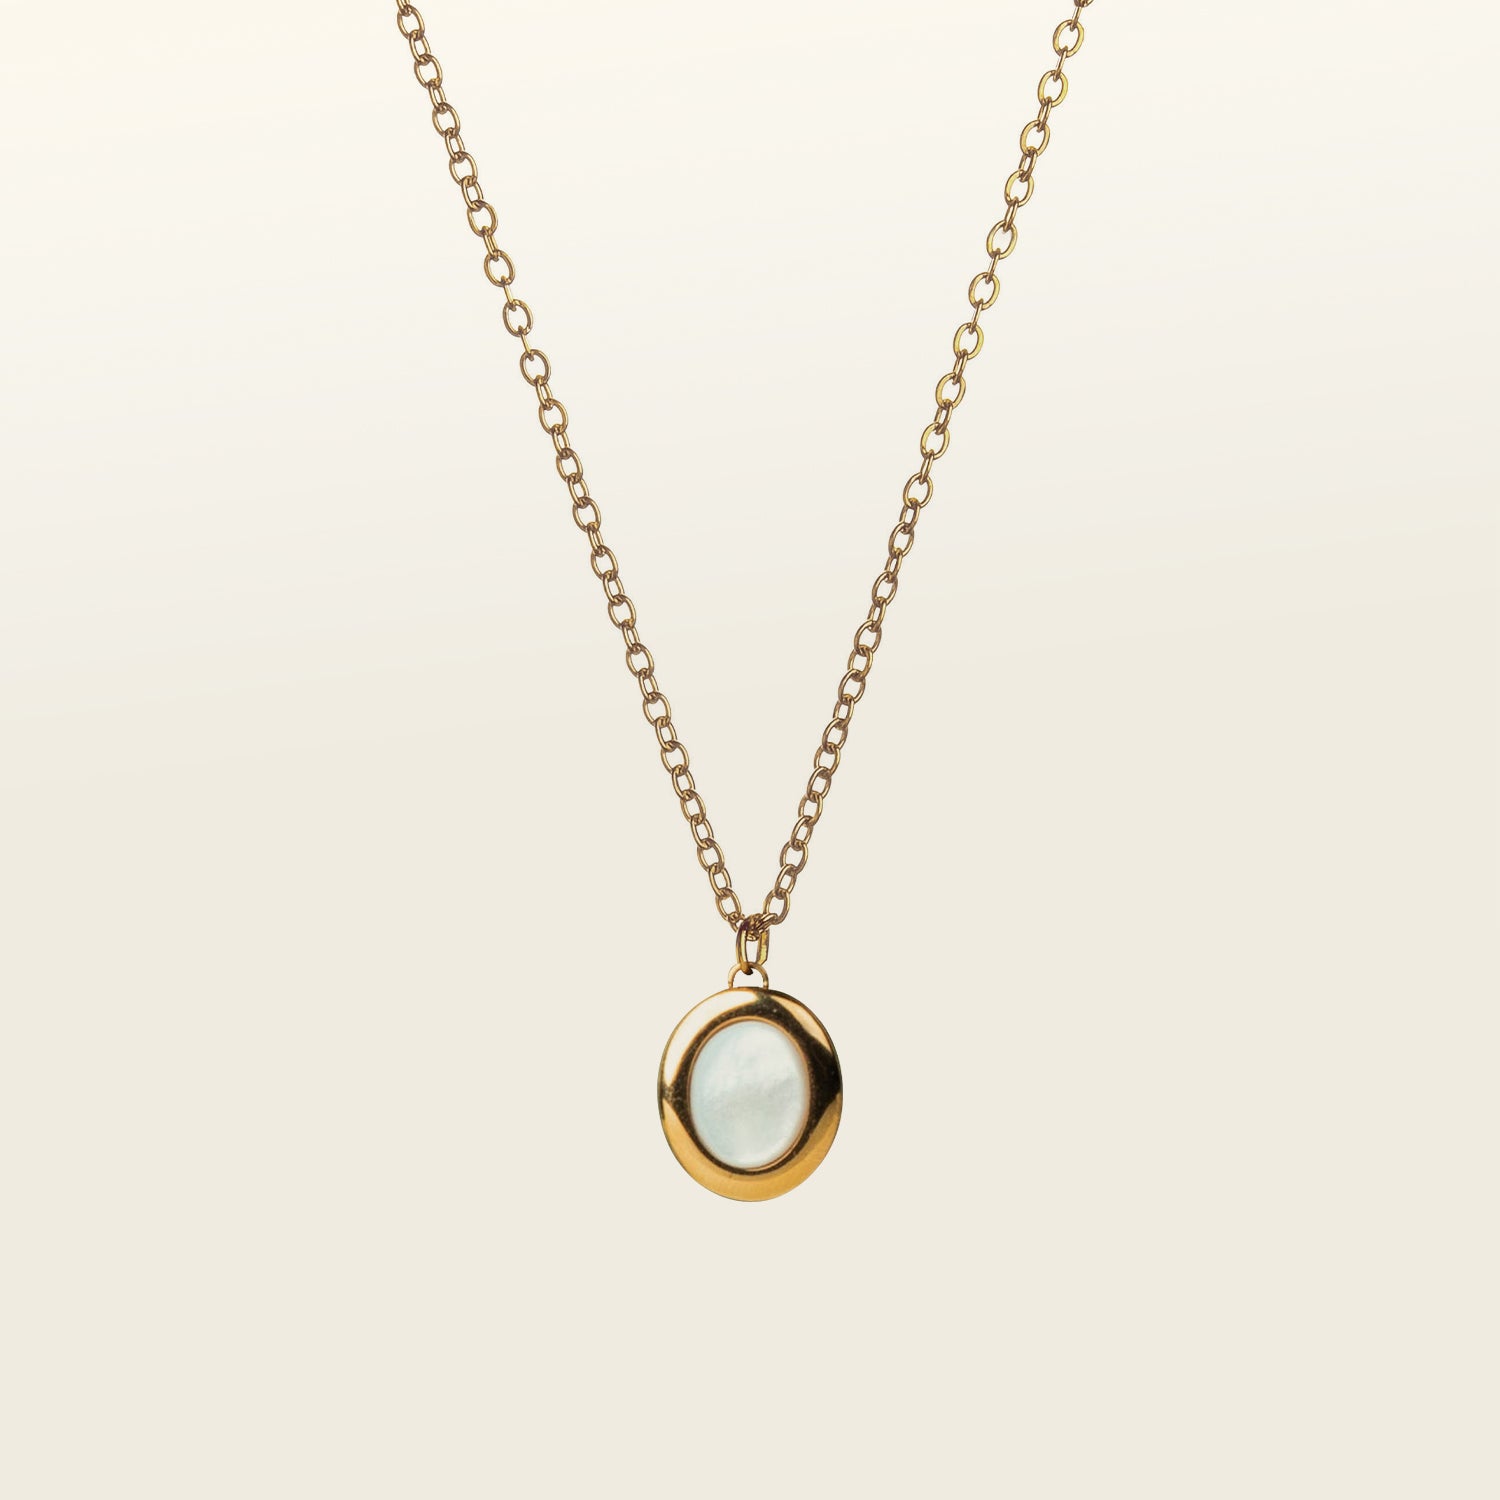 Image of the Mother of Pearl Pendant Necklace is crafted from 18K Gold Plated over Stainless Steel and is both non-tarnish and waterproof - perfect for everyday wear. For an added touch, pair the necklace with its sister Celestial Ring for the complete, stunning look.